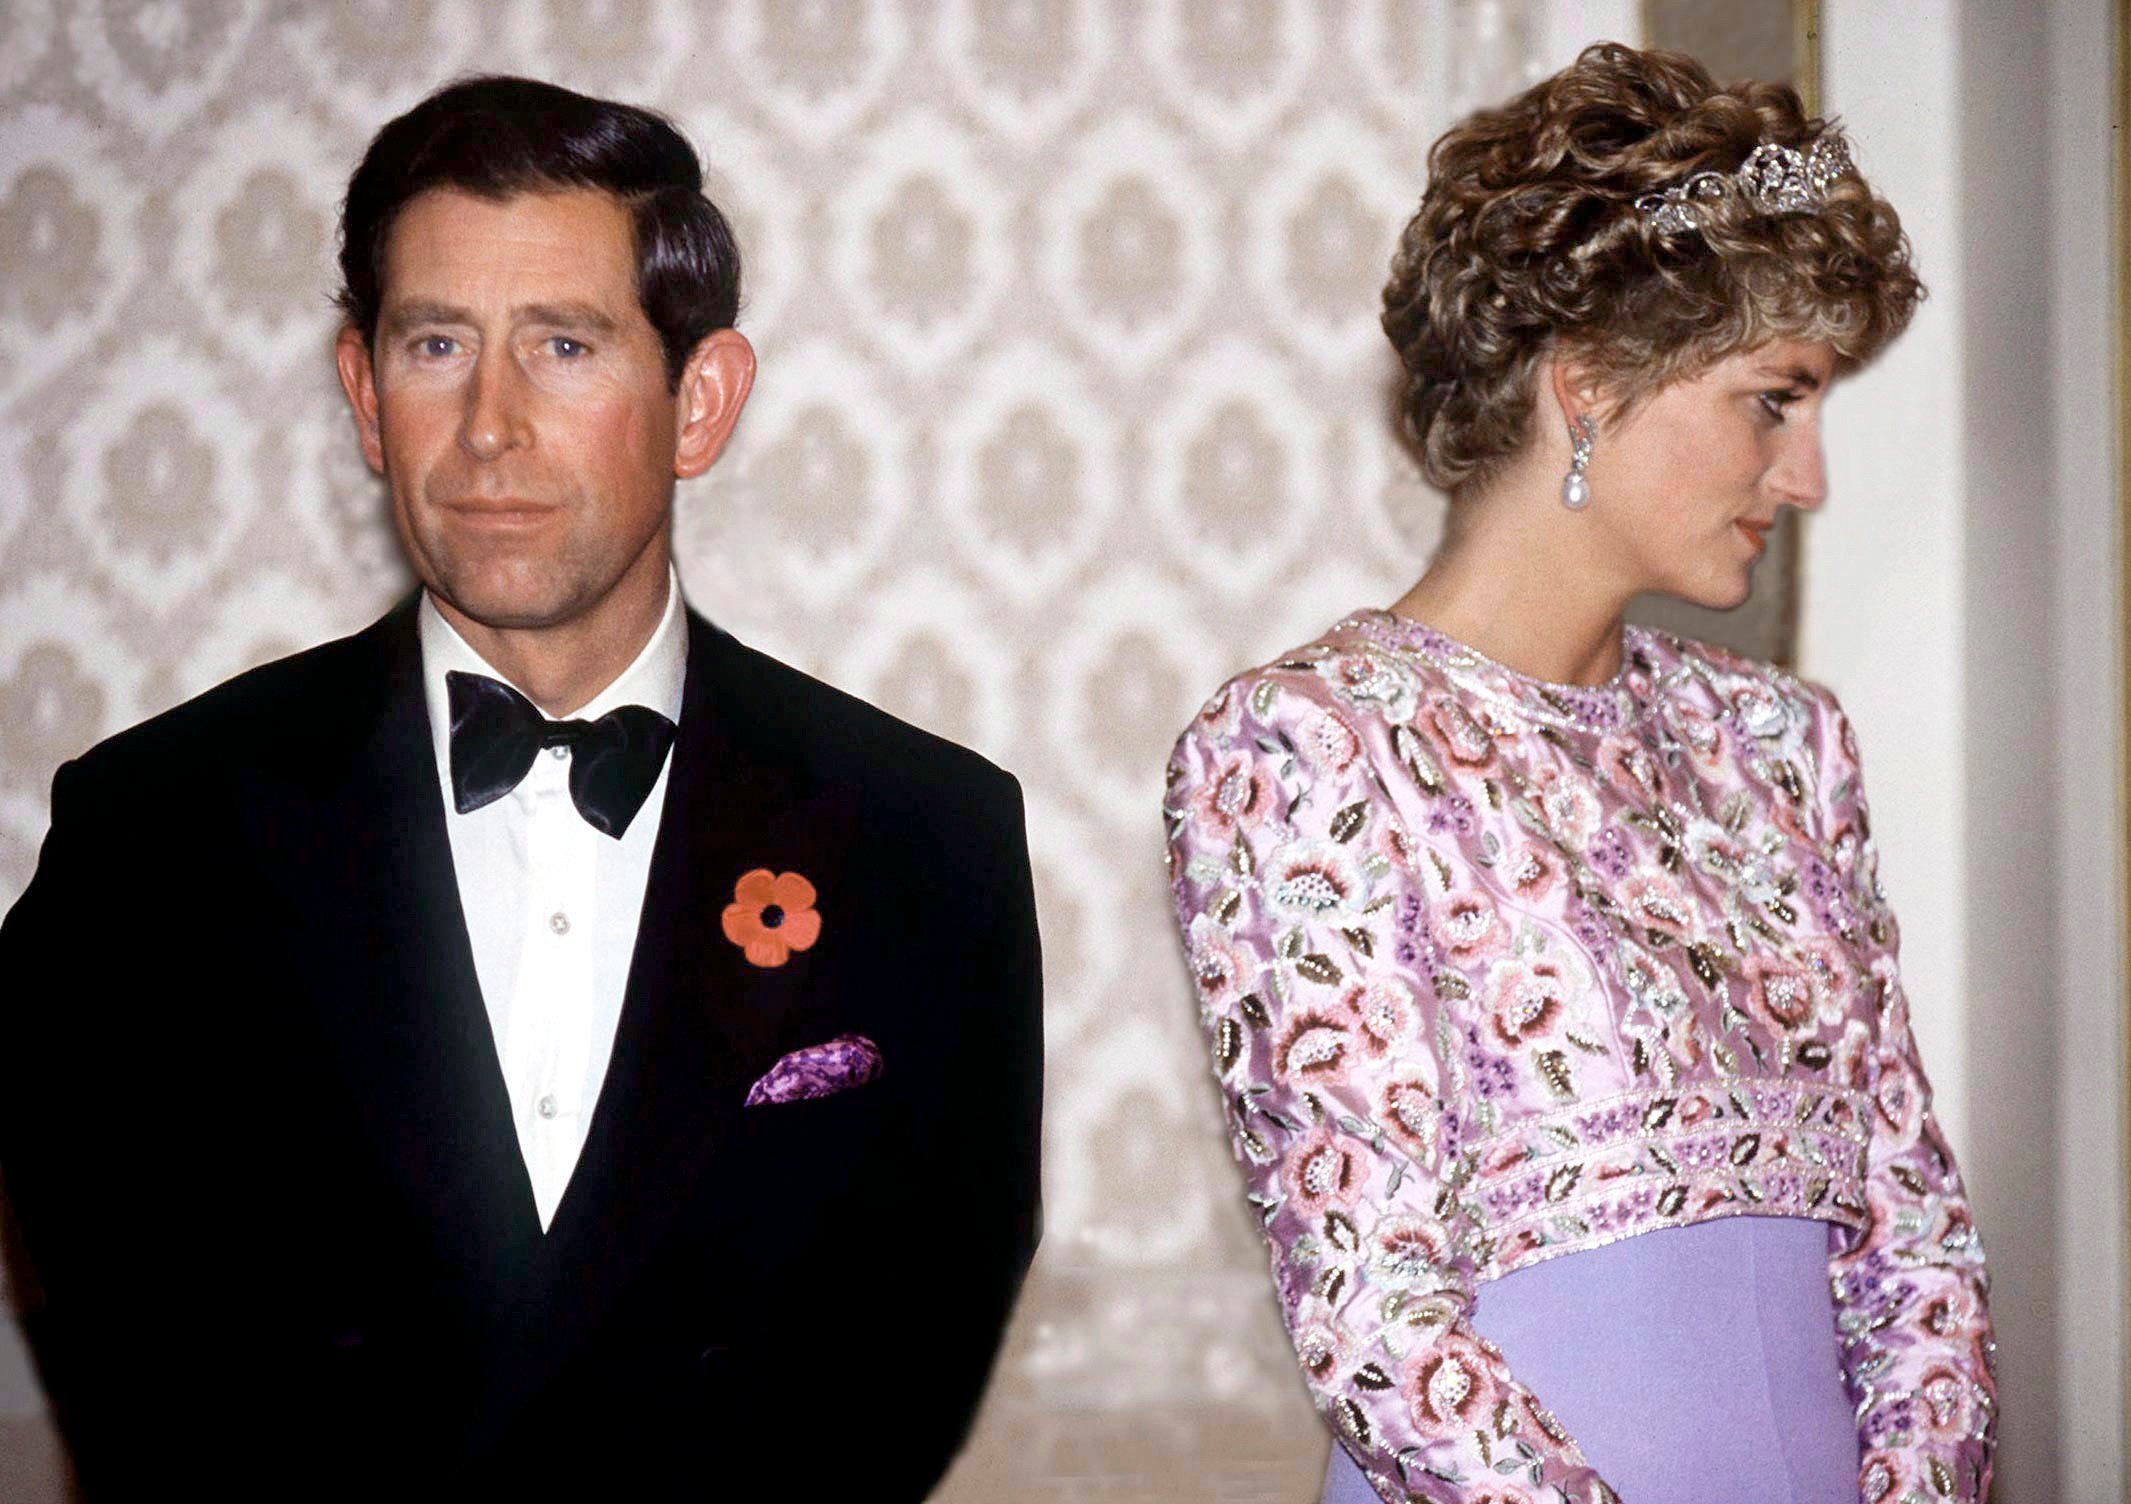 Prince Charles and Princess Diana in formal attire standing next to each other but looking in opposite directions